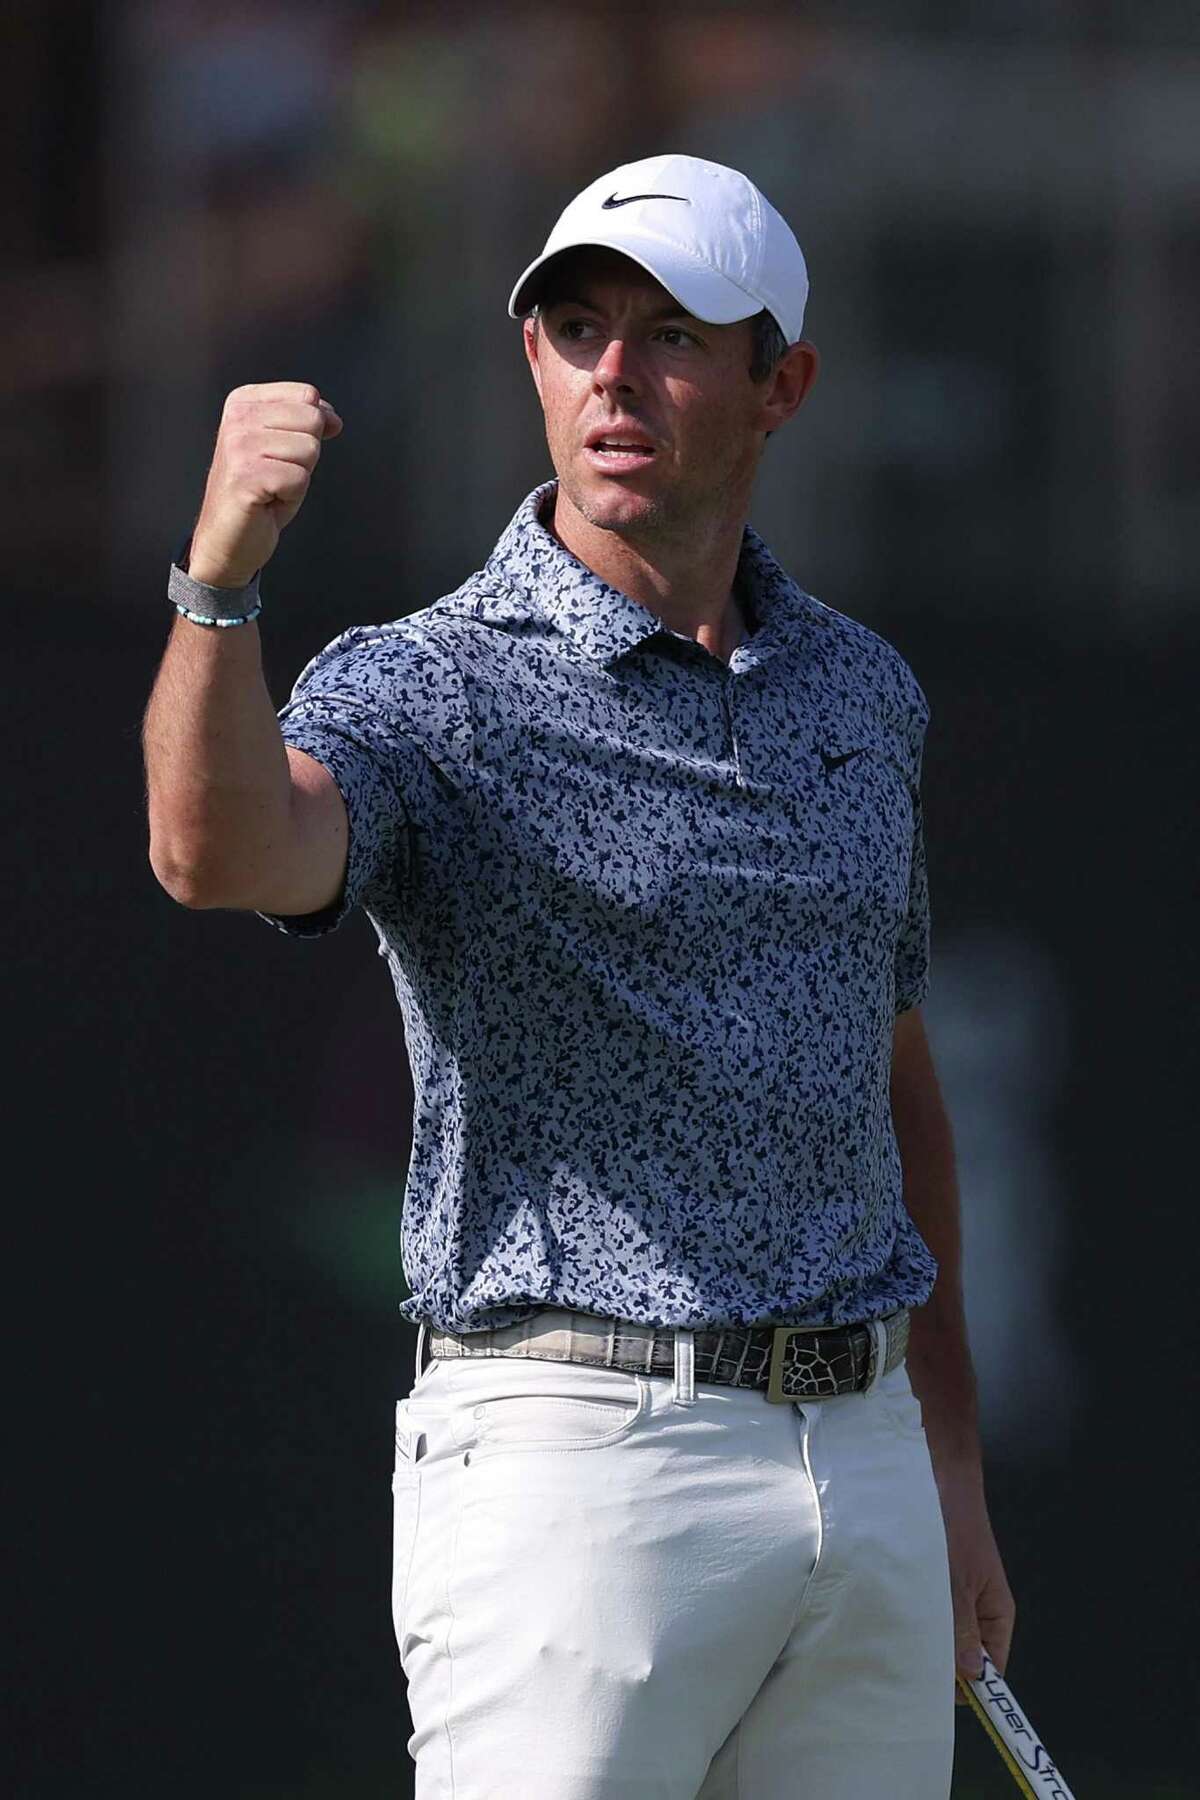 Rory McIlroy lets out some emotion after winning the Dubai Desert Classic on Monday.